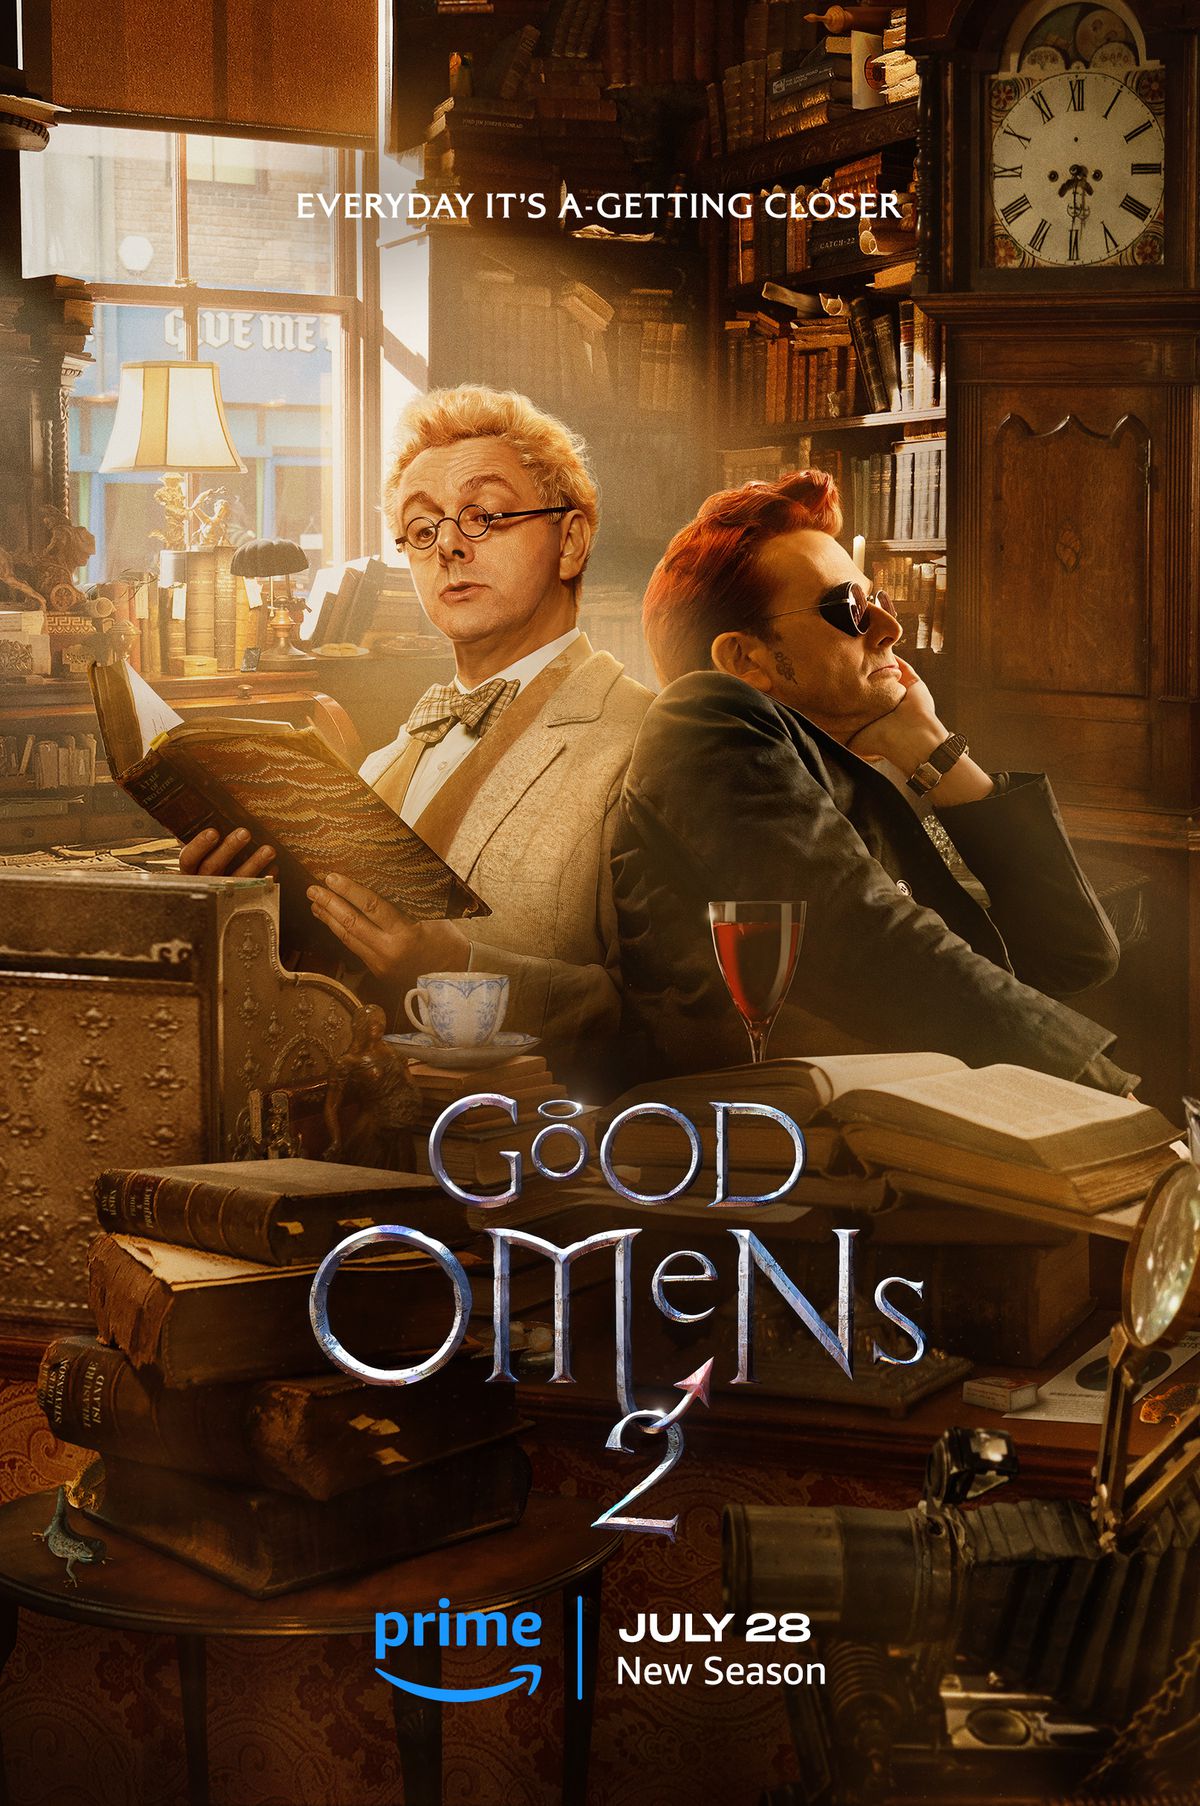 Michael Sheen as Aziraphale and David Tennant as Crowley, both lounging in a cluttered, golden-hued bookstore. 